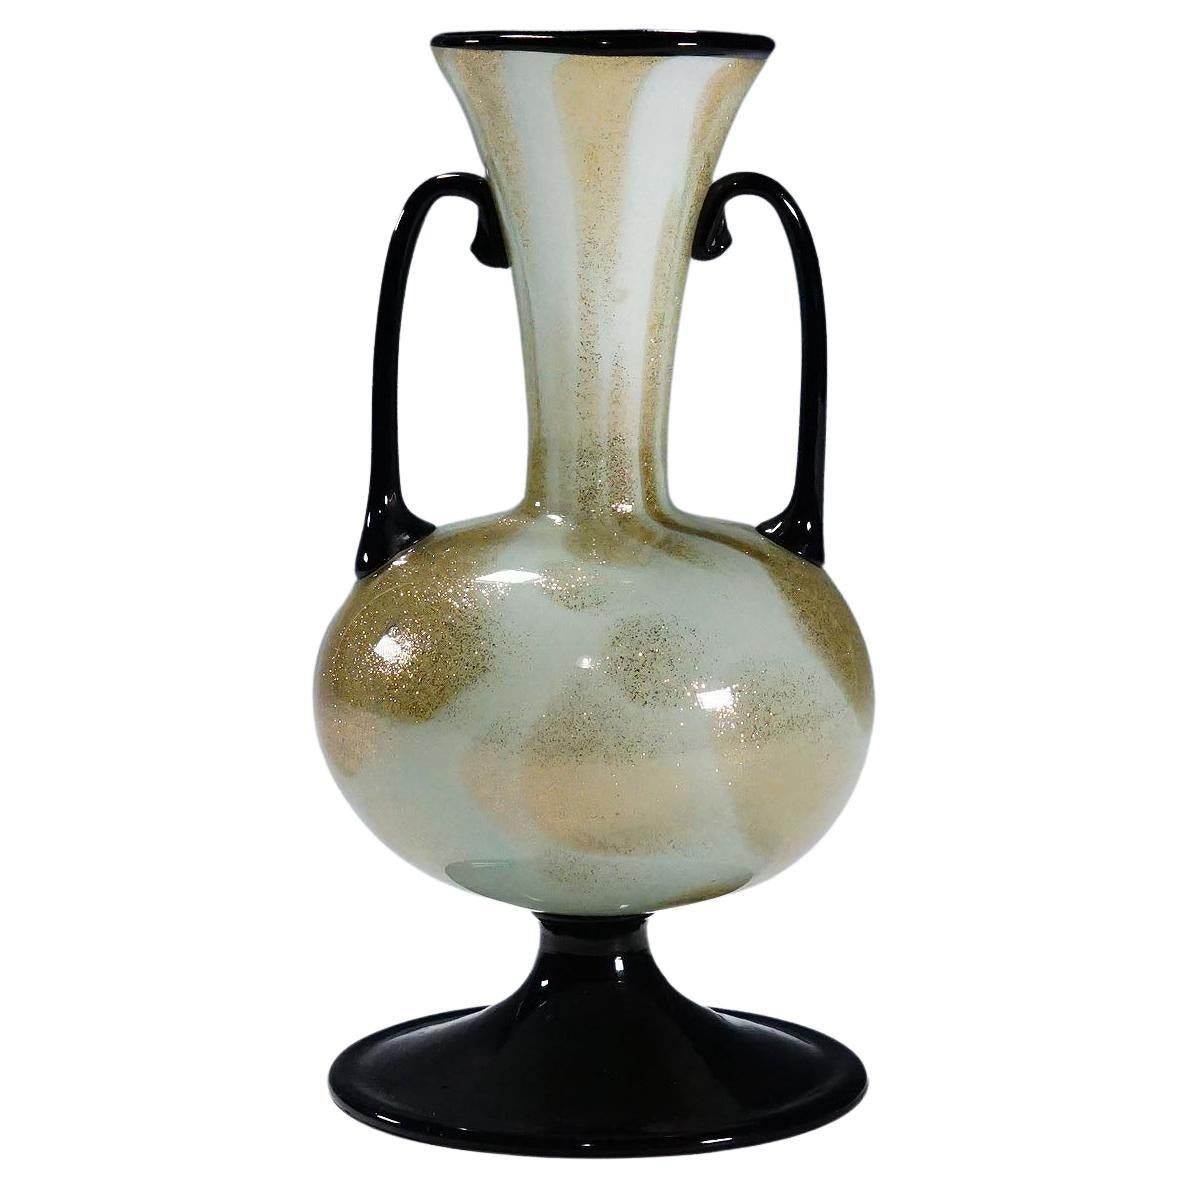 A Soffiato Glass Vase with Aventurine by Fratelli Toso (attr.), Murano ca. 1930s